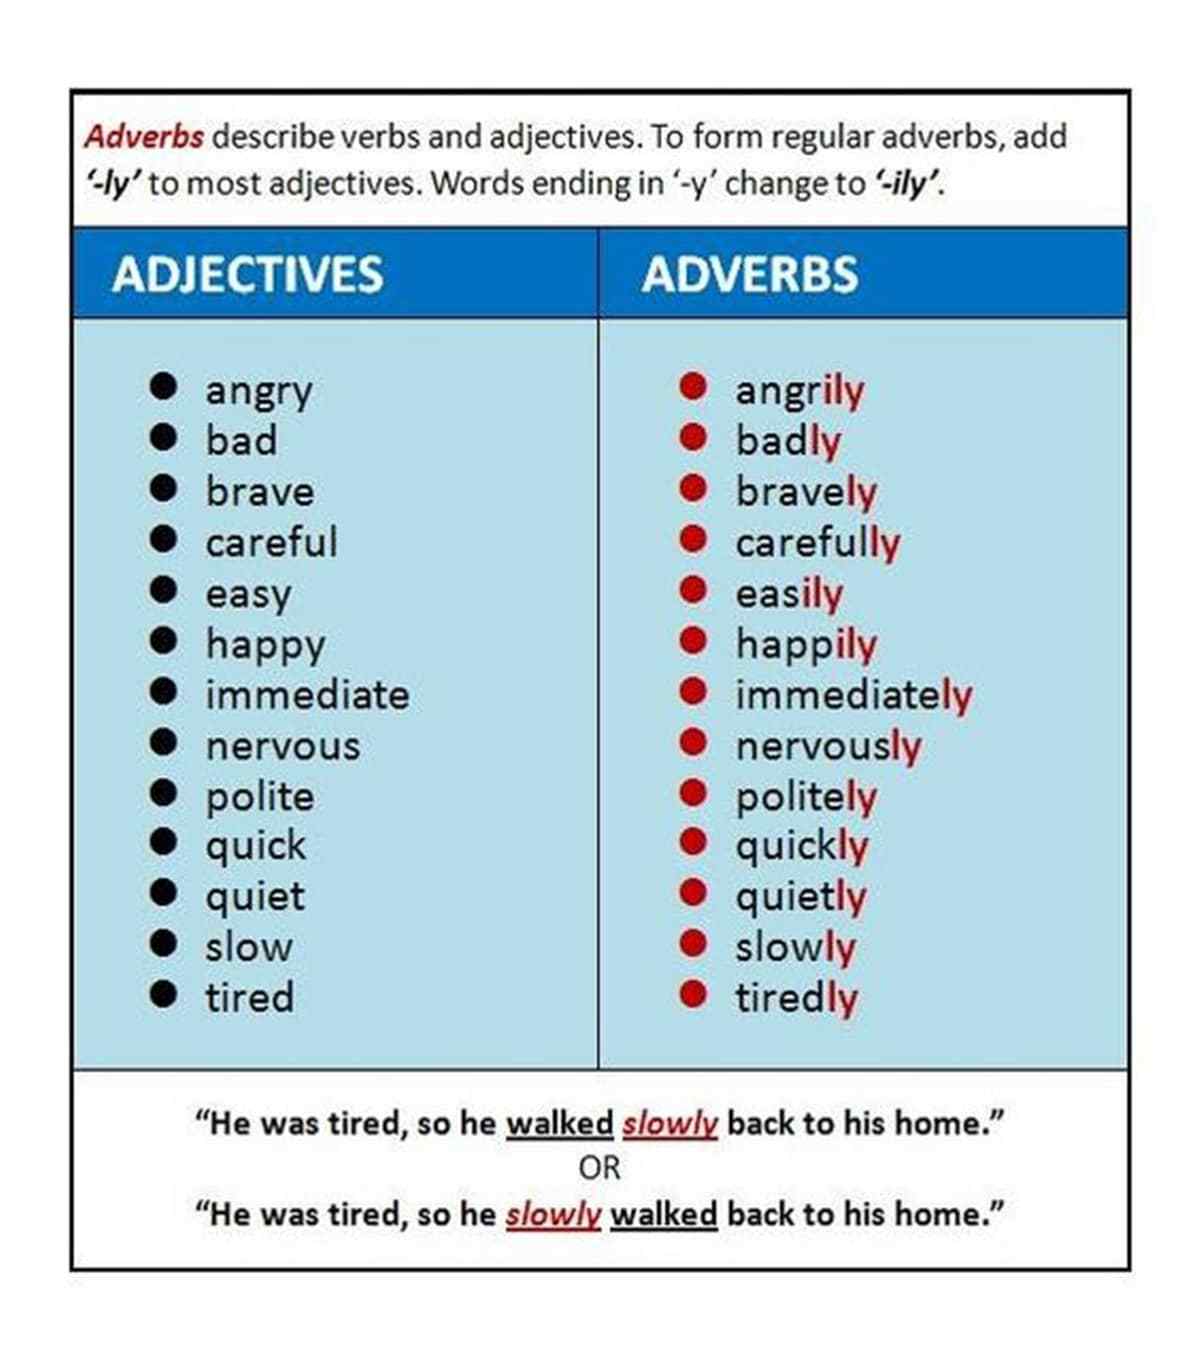 english-in-jerez-language-snippets-forming-adverbs